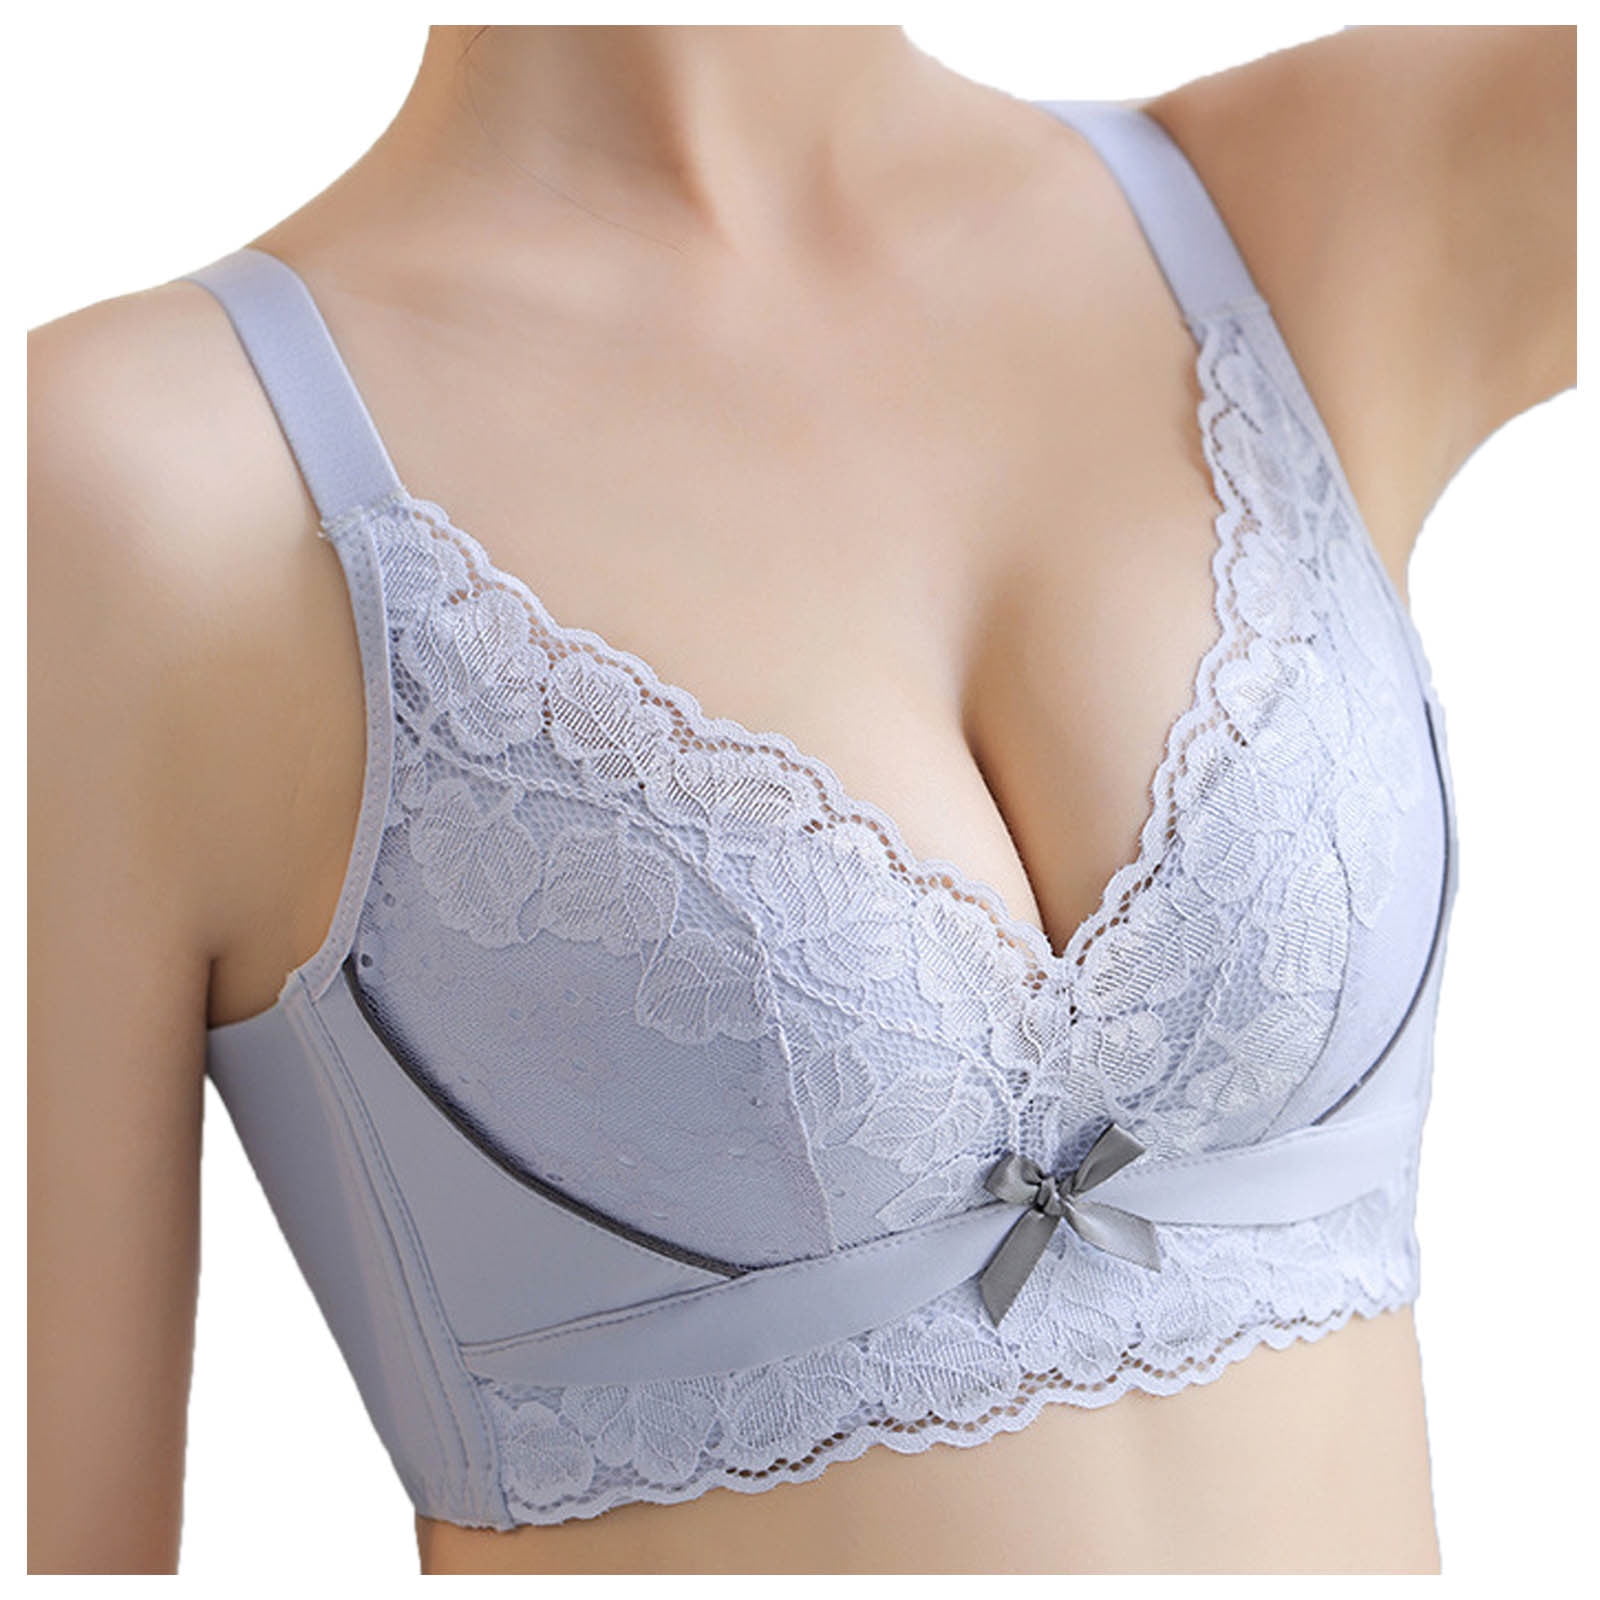 Mrat Clearance Bras for Large Breasts Lady Mesh Push up Bra